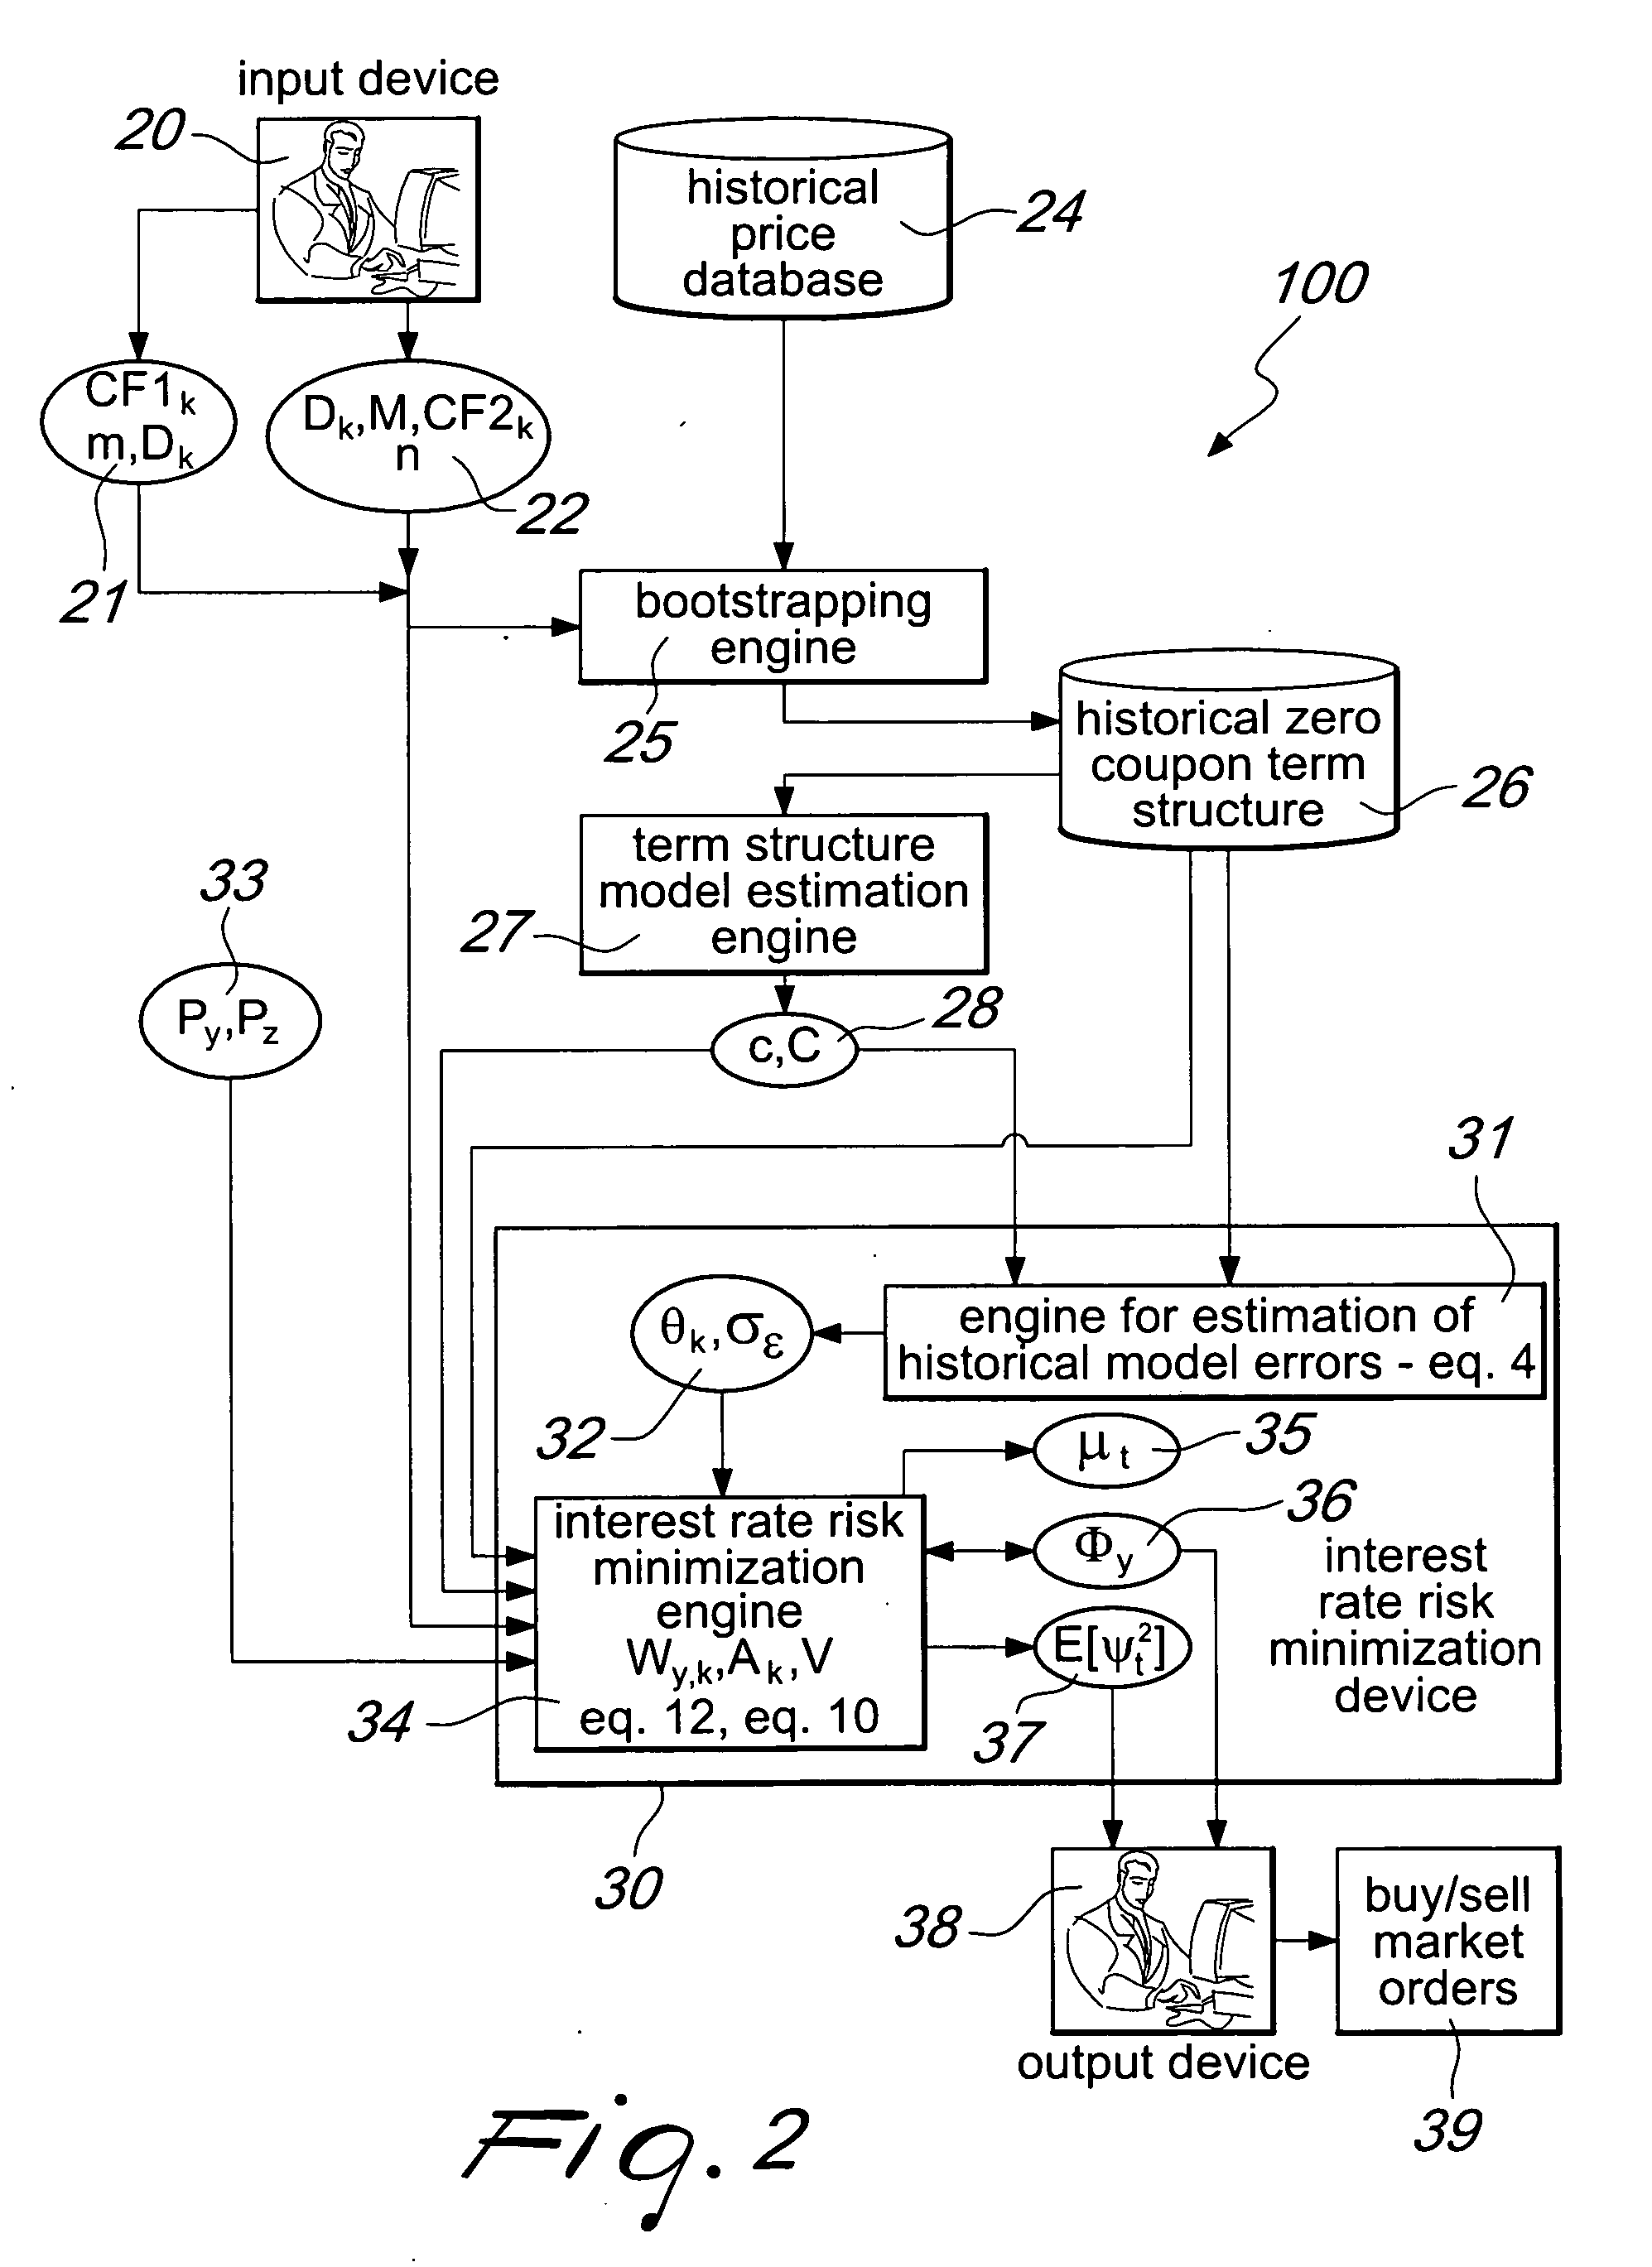 System and method for improving the minimization of the interest rate risk